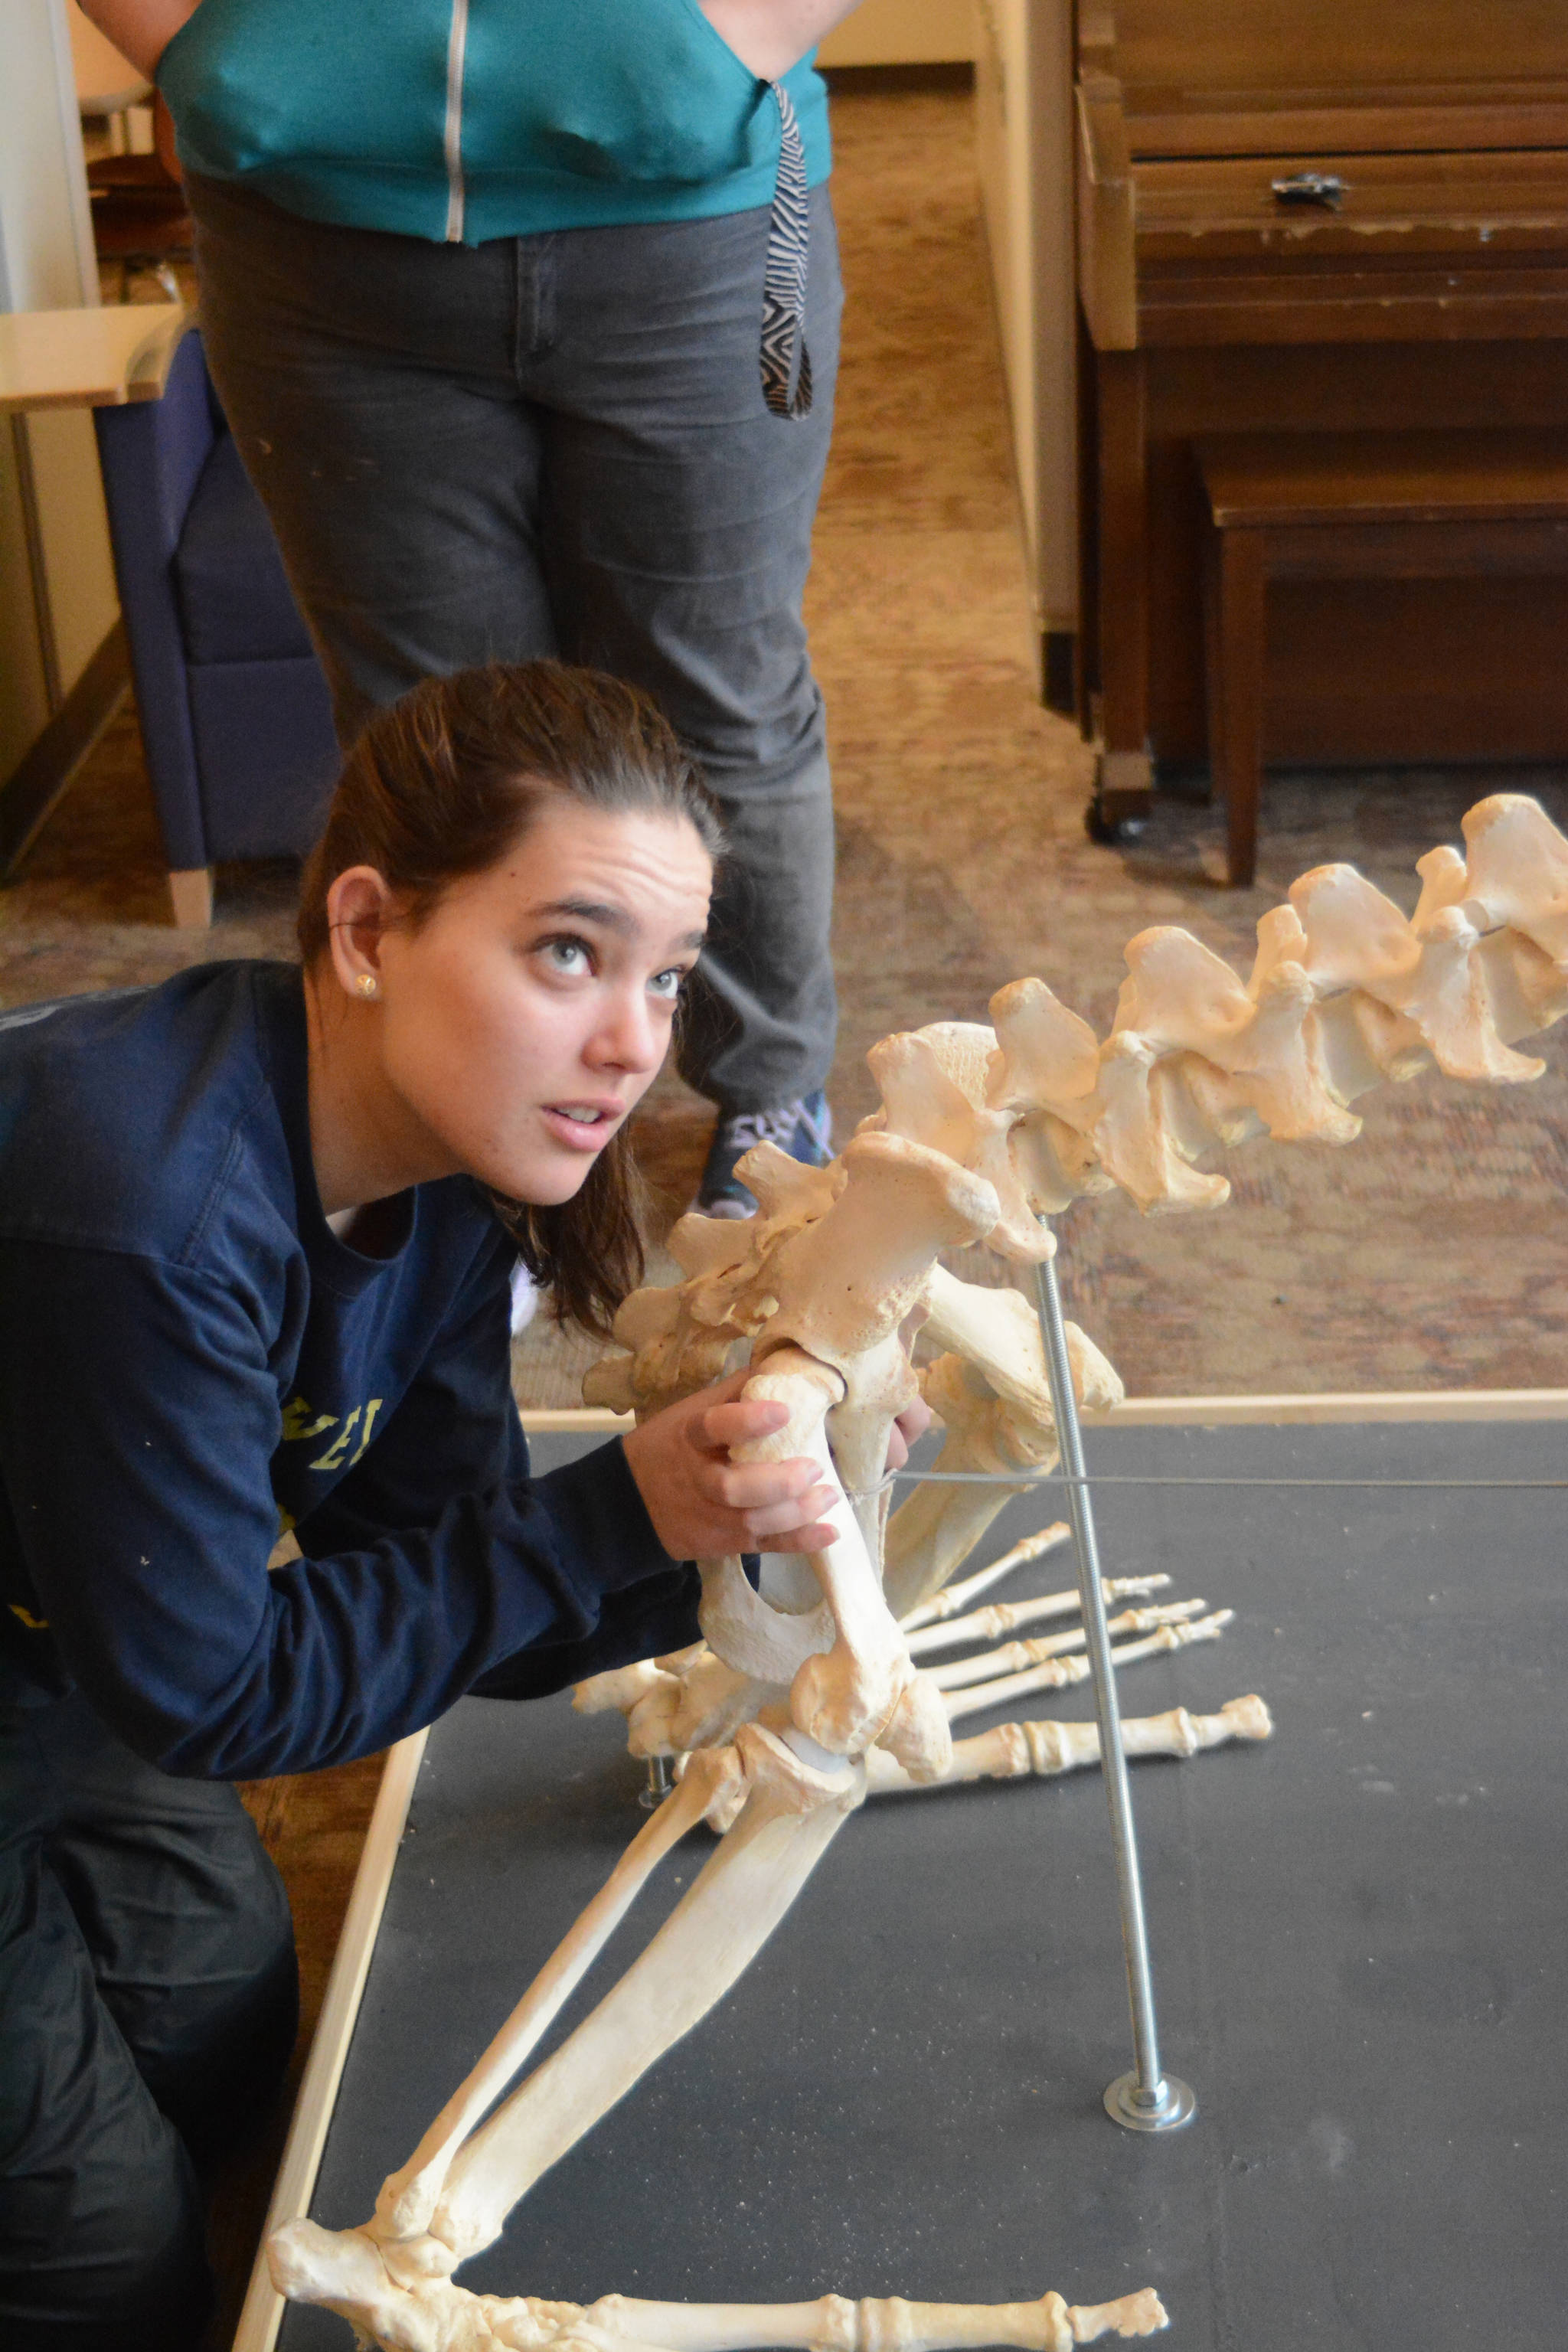 Nicole Webster helps assemble the skeleton of a sea lion, Woody, Wednesday, Nov. 22, 2017 in Pioneer Hall of Kachemak Bay Campus in Homer, Alaska. She was part of a group of students who helped articulate Woody’s skeleton in Lee Post’s Marine Skeleton Articulation class. Woody lived at the SeaLife Center in Seward before he died at the age of 22. (Photo by Michael Armstrong, Homer News)